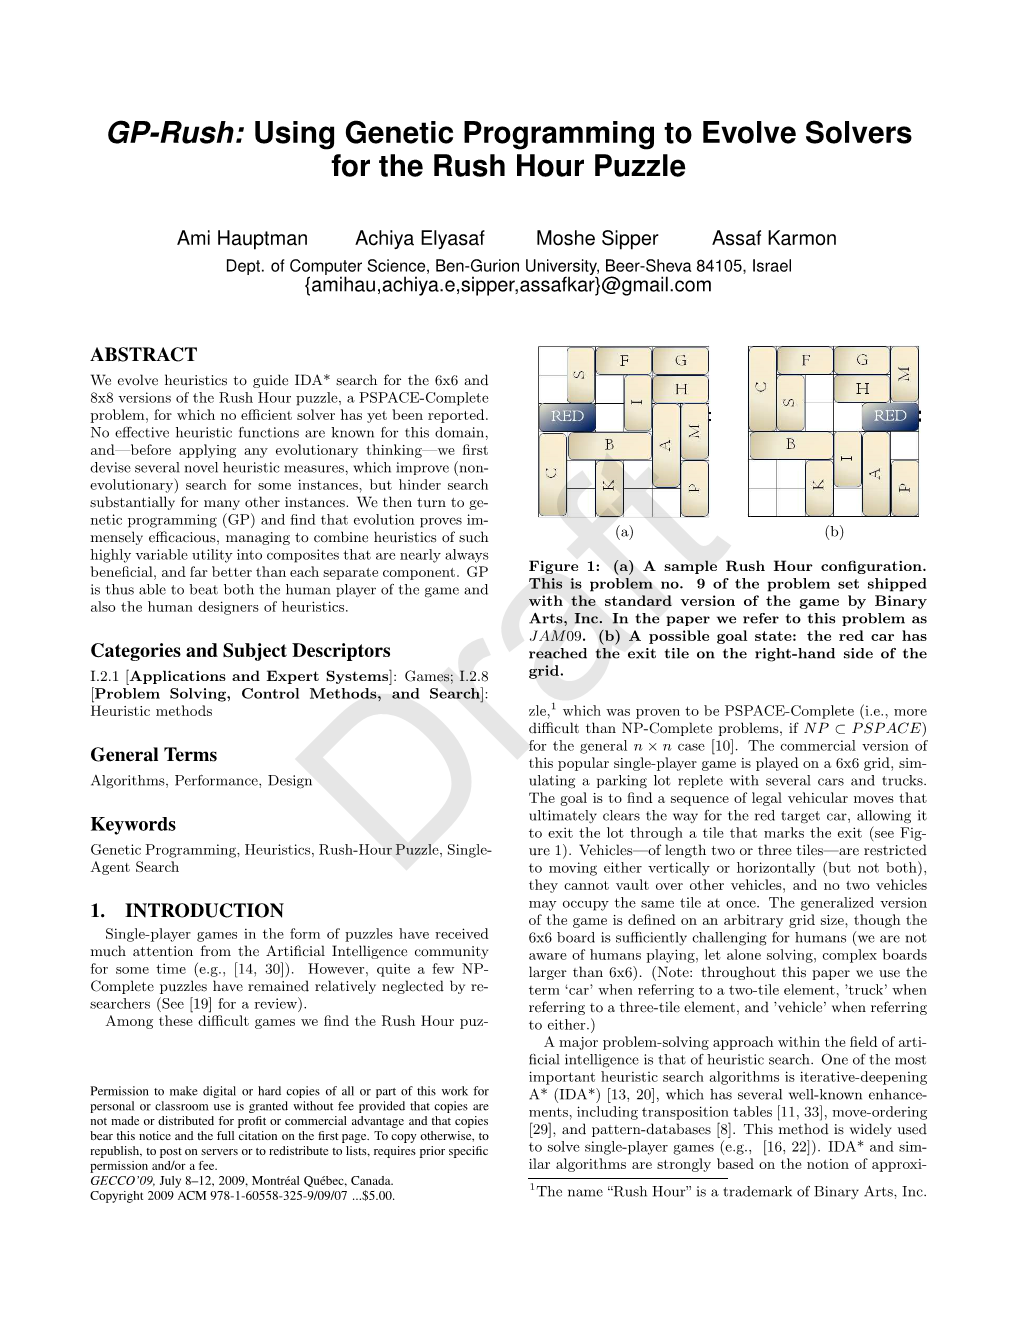 Using Genetic Programming to Evolve Solvers for the Rush Hour Puzzle